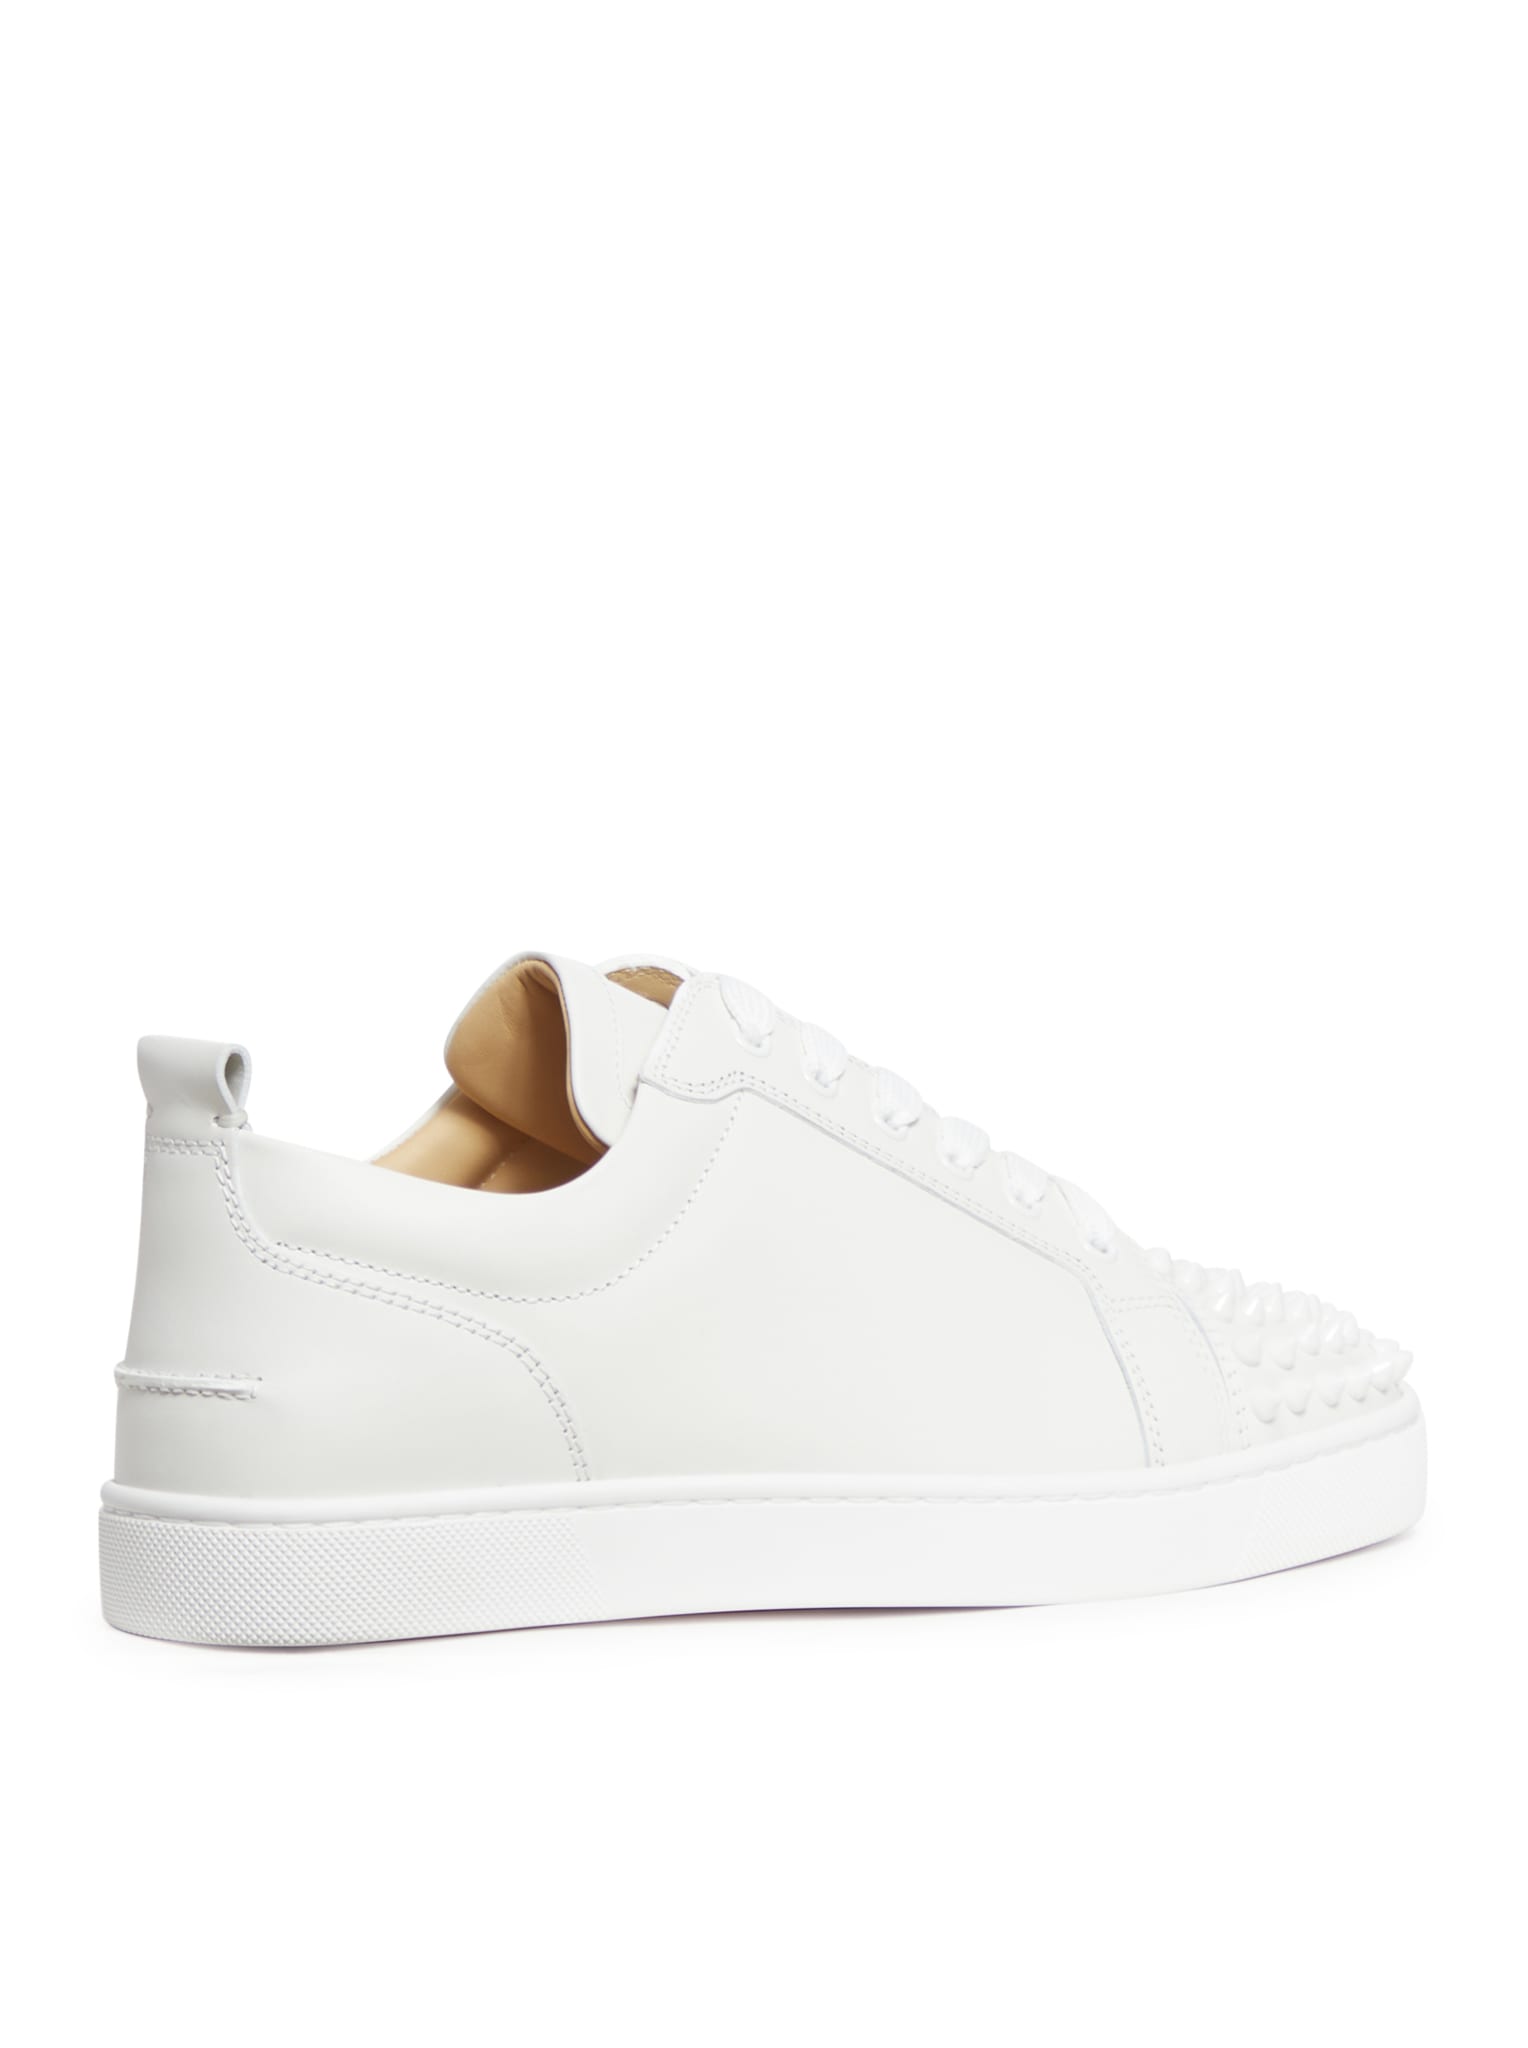 Shop Christian Louboutin Louis Junior Spikes Flat Calf Ds In White